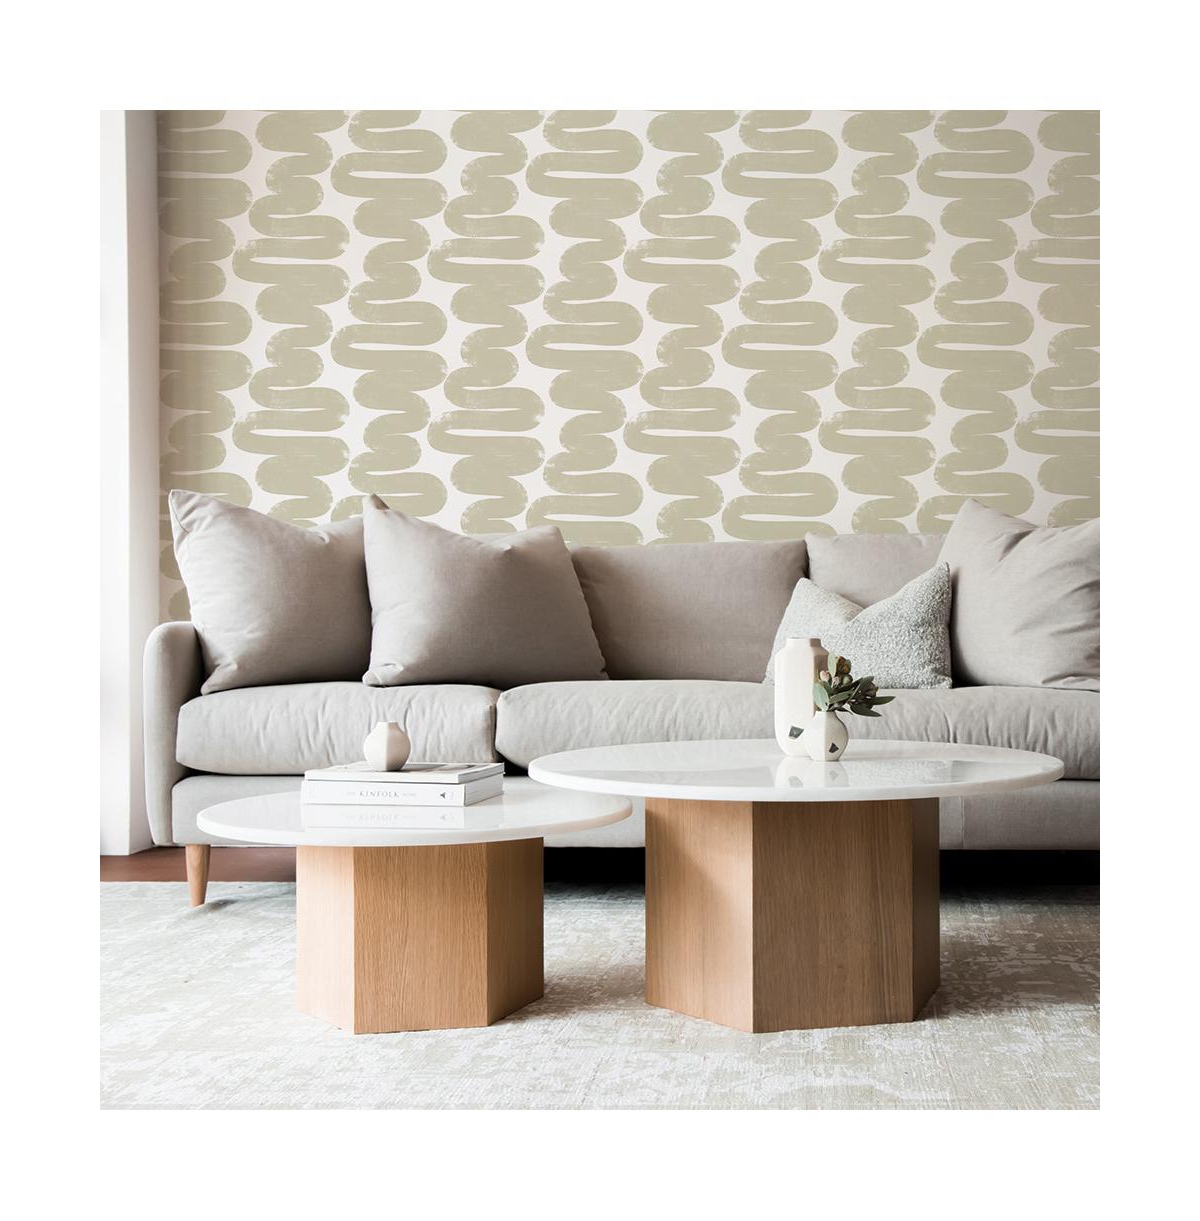 Tempaper Wiggle Room Peel And Stick Wallpaper In Sand White